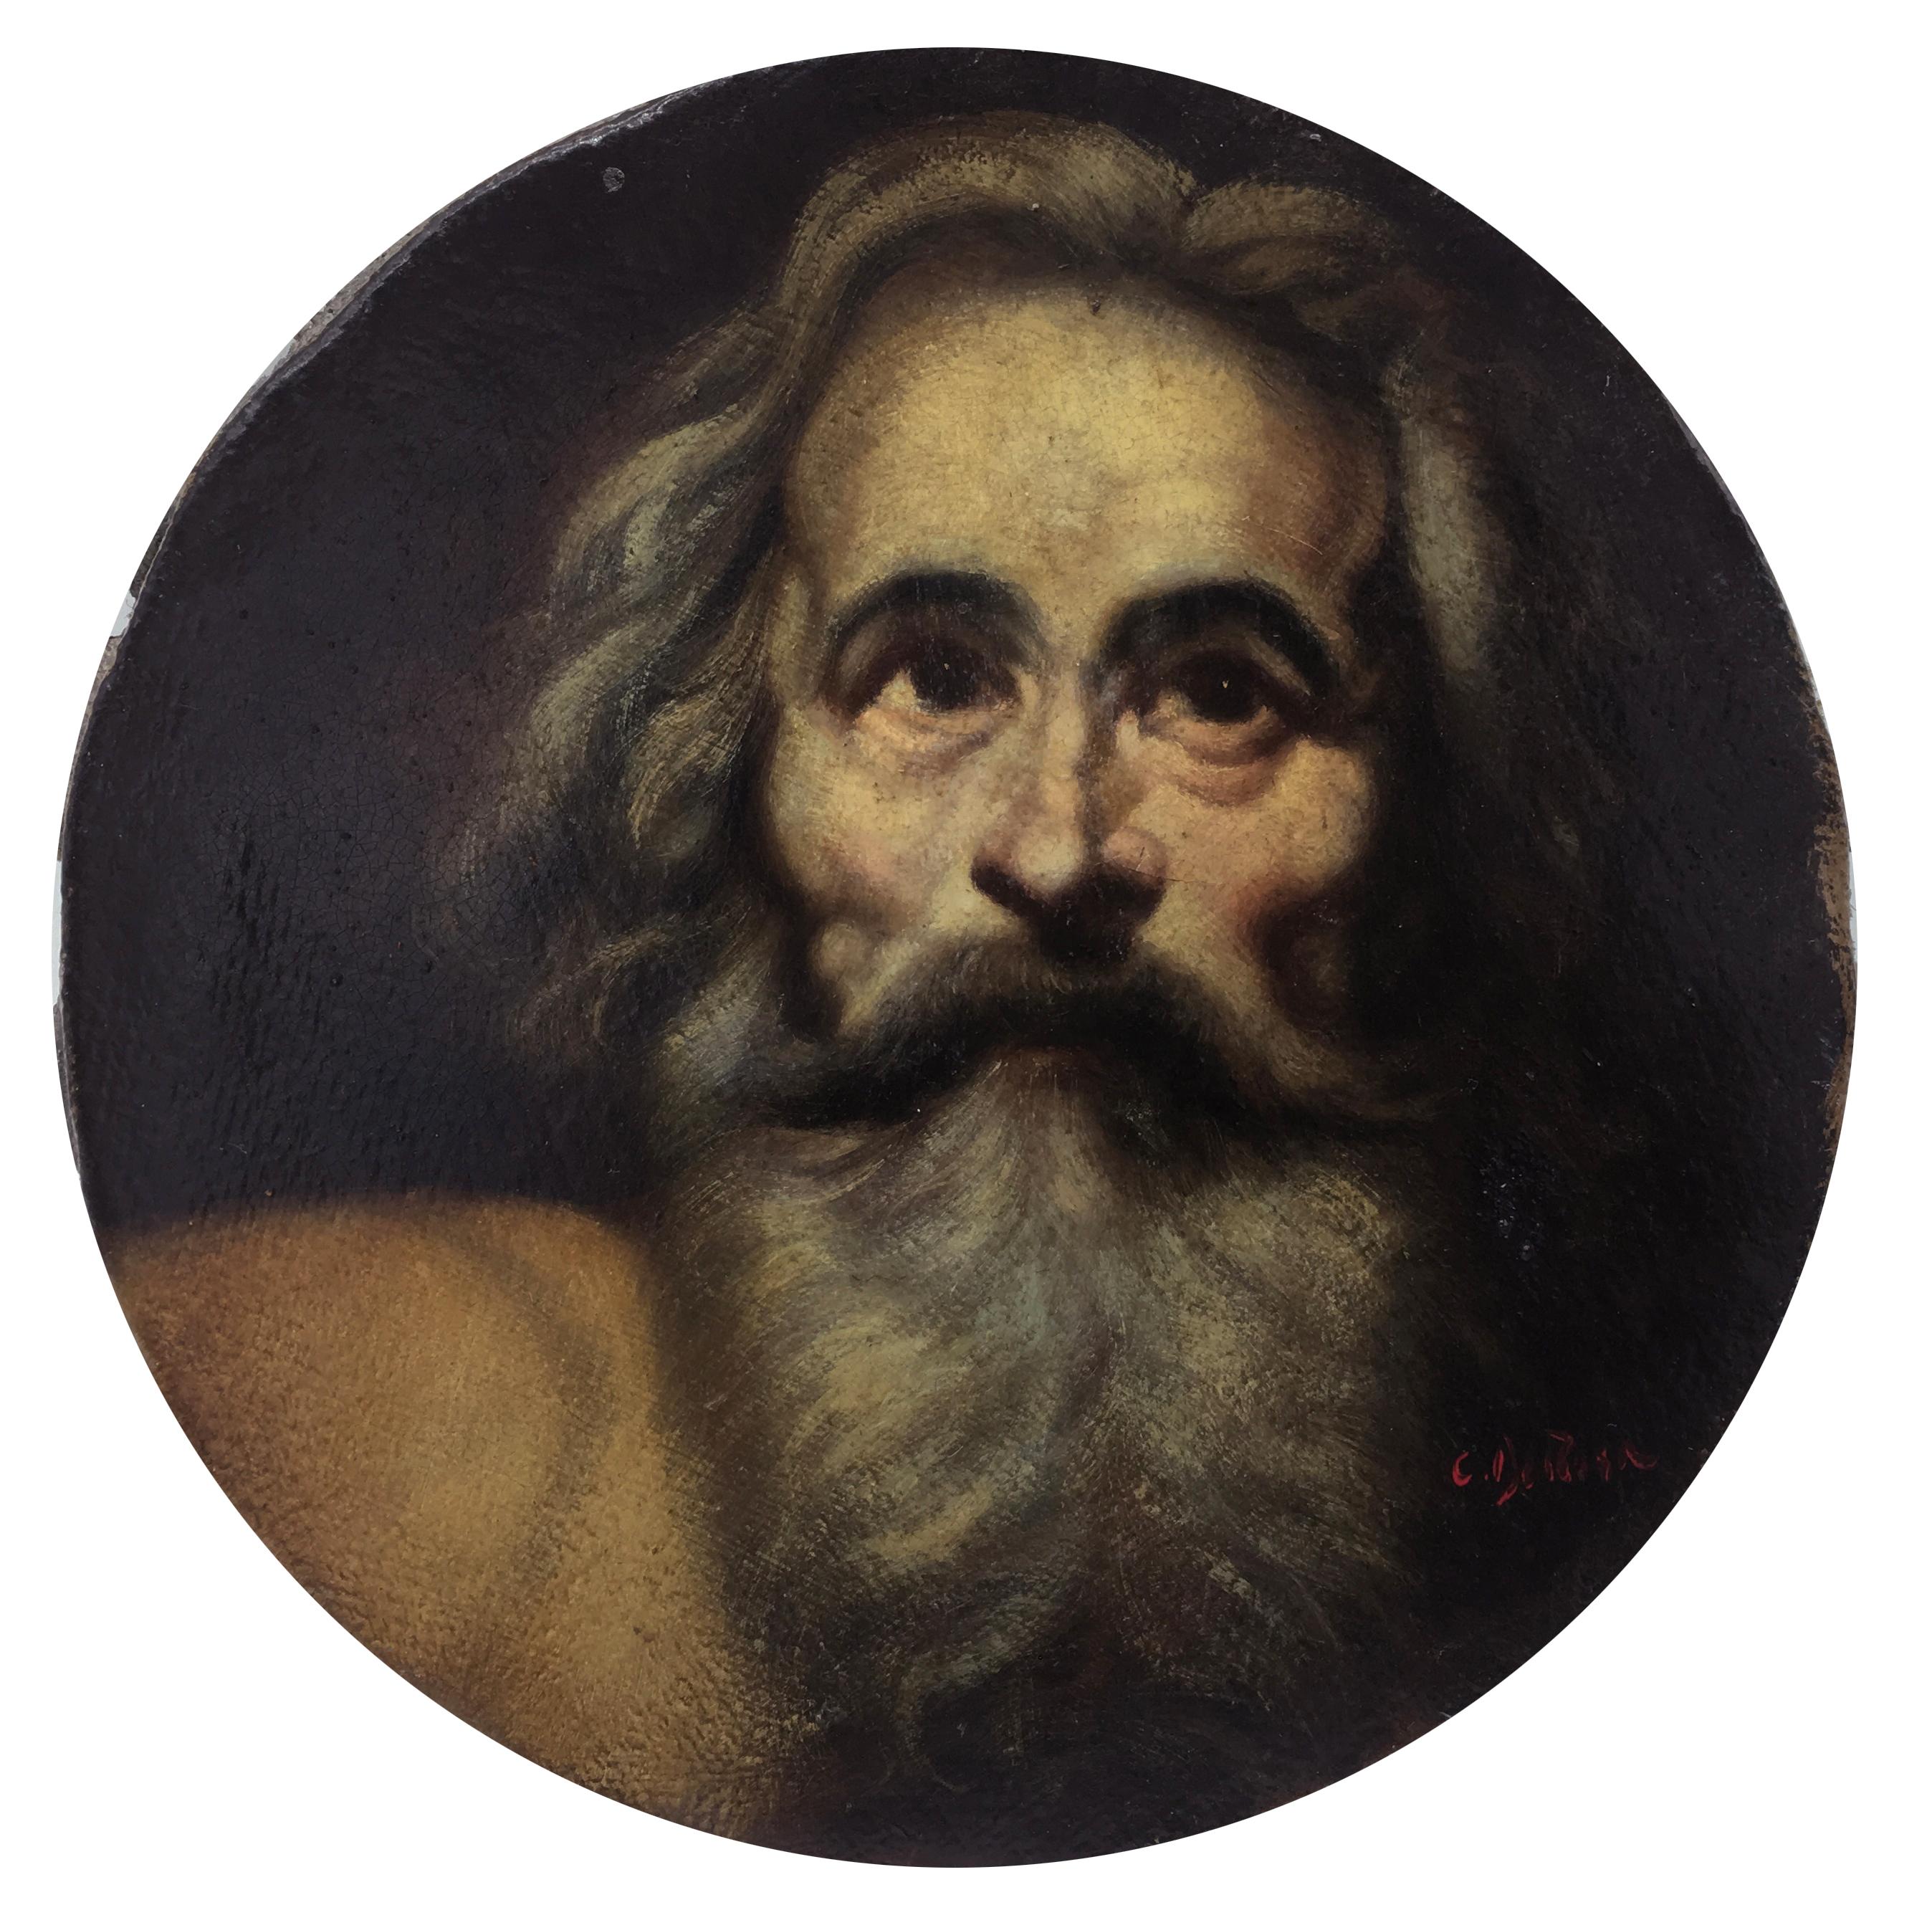 PHILOSOPHER - Dutch and Flemish- Oil on canvas painting- Italy - Painting by Ciro De Rosa